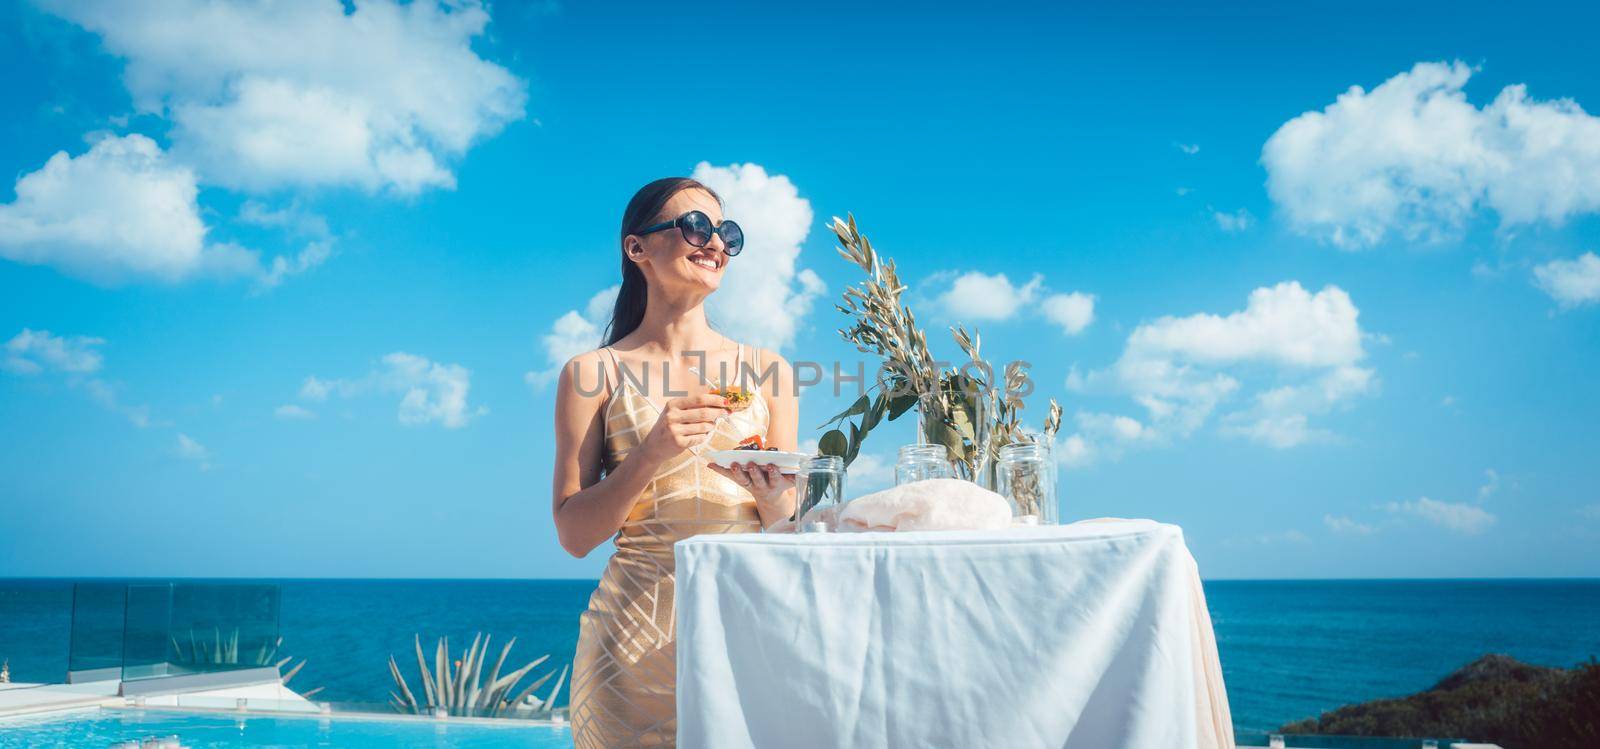 Woman in golden dress having food at beach party by Kzenon